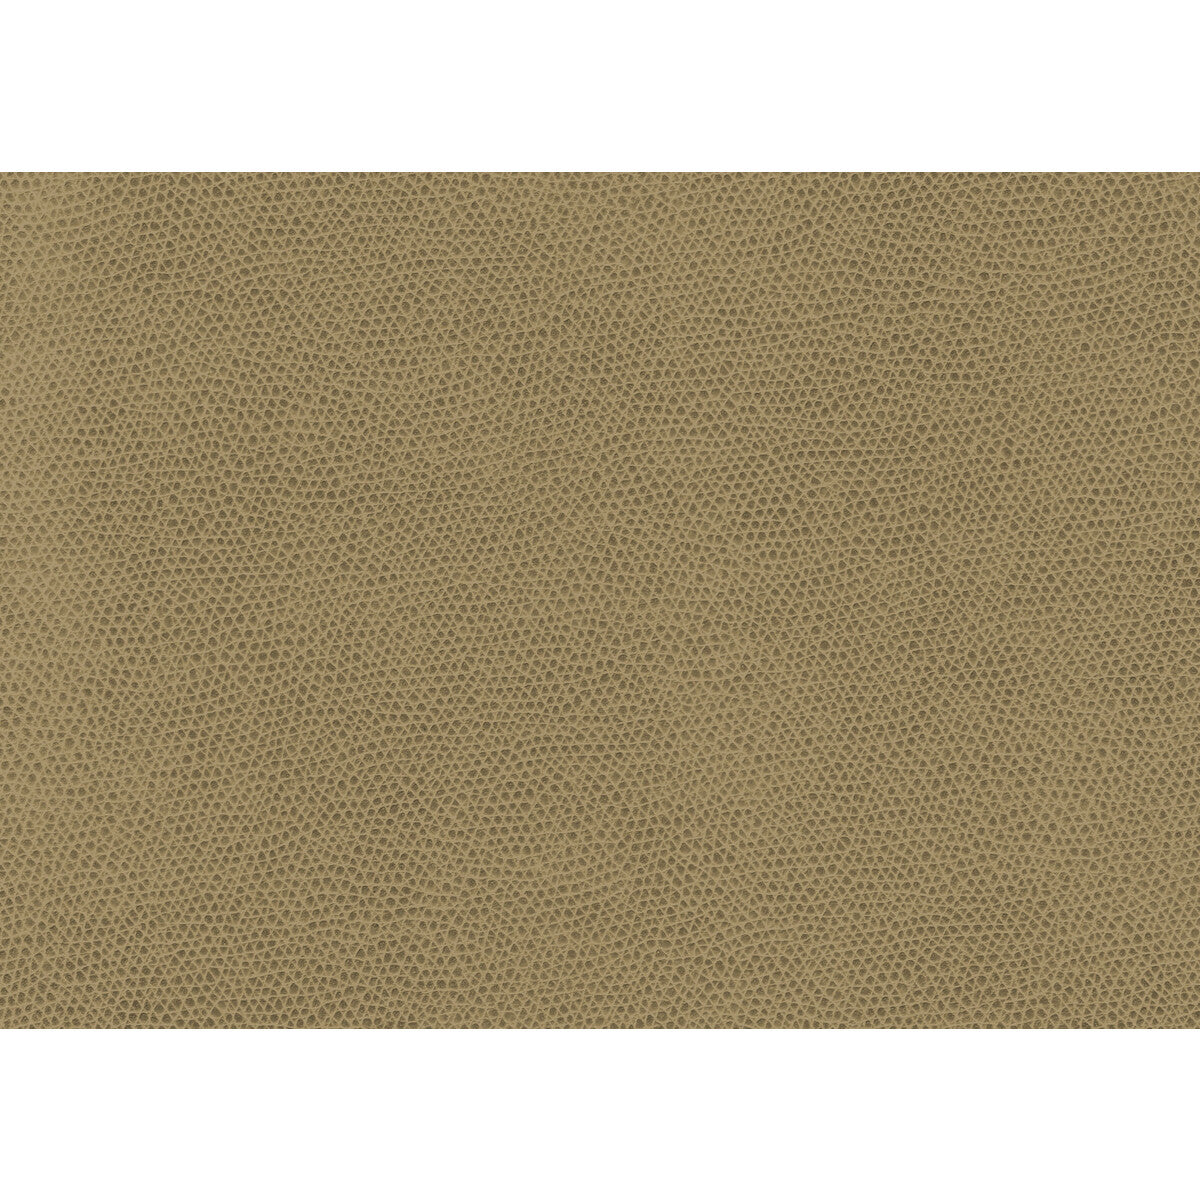 Ophidian fabric in wheat color - pattern OPHIDIAN.16.0 - by Kravet Contract in the Contract Sta-Kleen collection